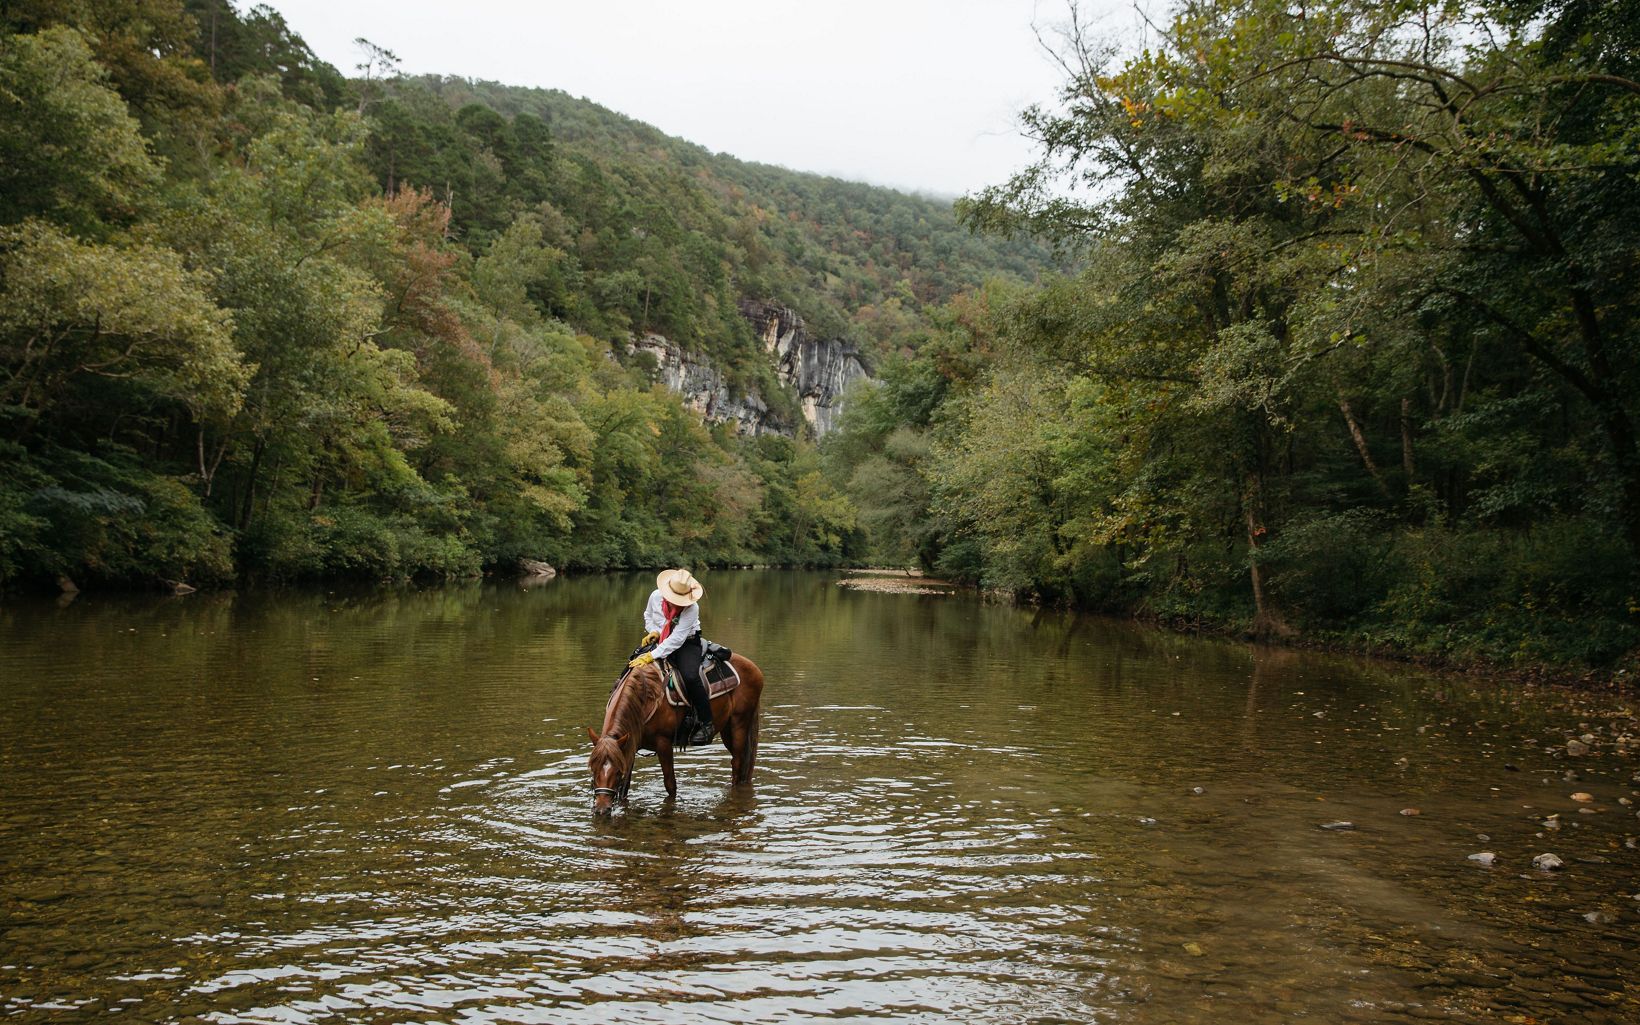 A horse and rider stop in the middle of a river where they are surrounded by trees. the horse is bending its neck down to drink water. 